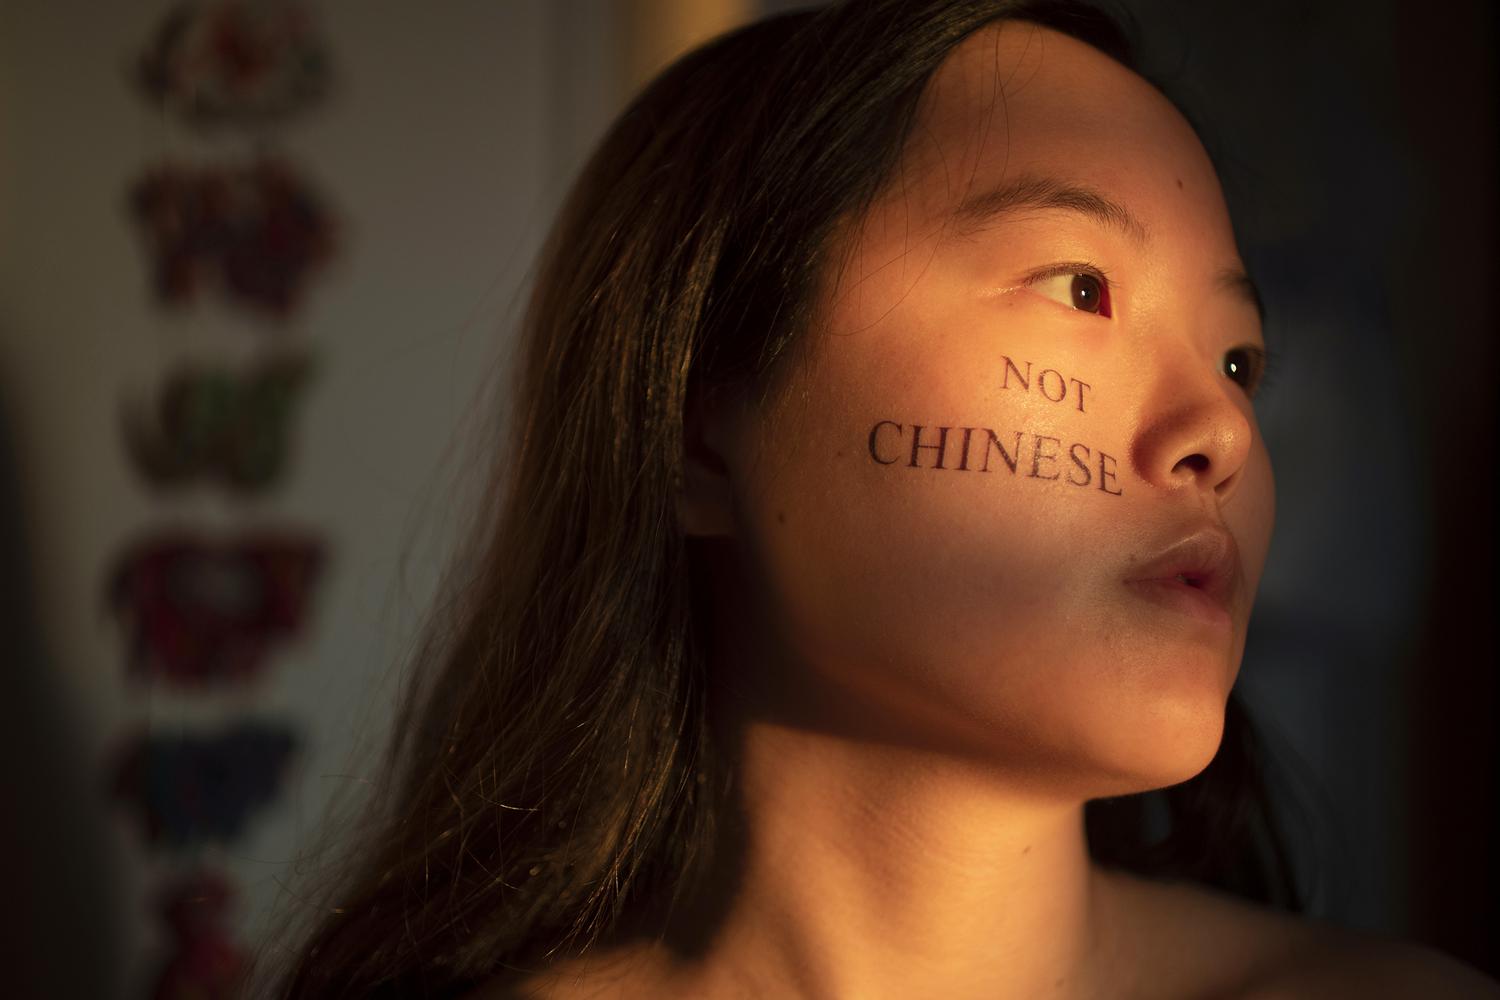 portrait of the artist with the words "not chinese" written on her right cheek